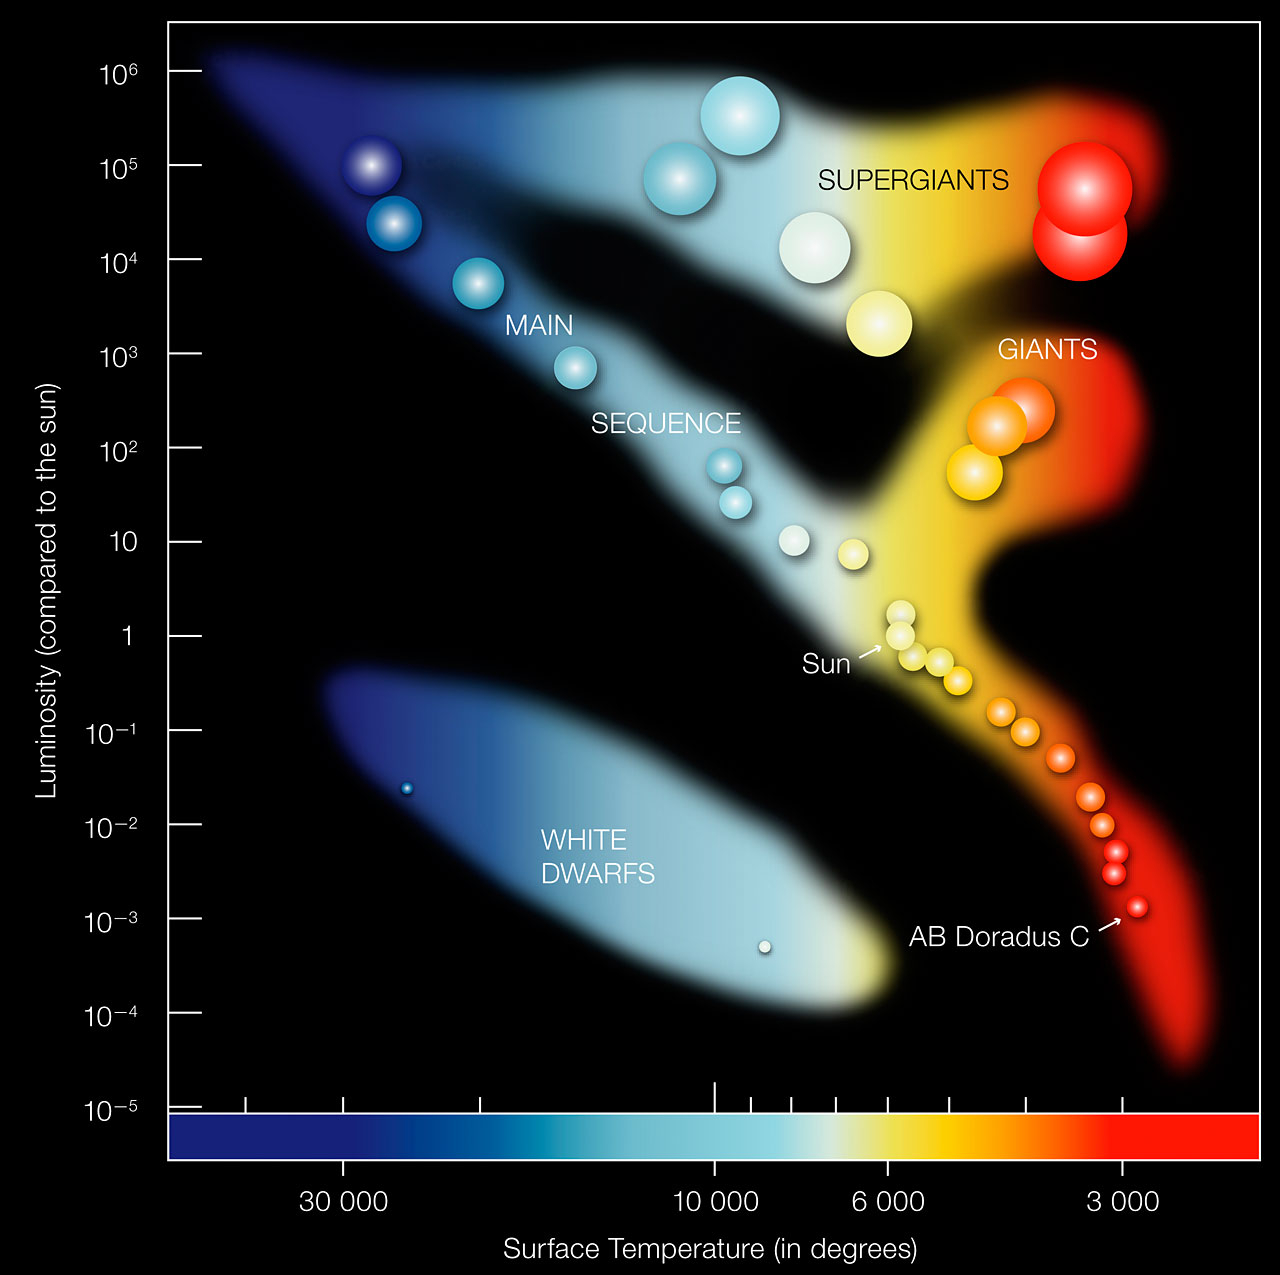 Hr Diagram Definition Hertzsprung Russell Diagram With Names Of Stars Hr Diagram Wiring